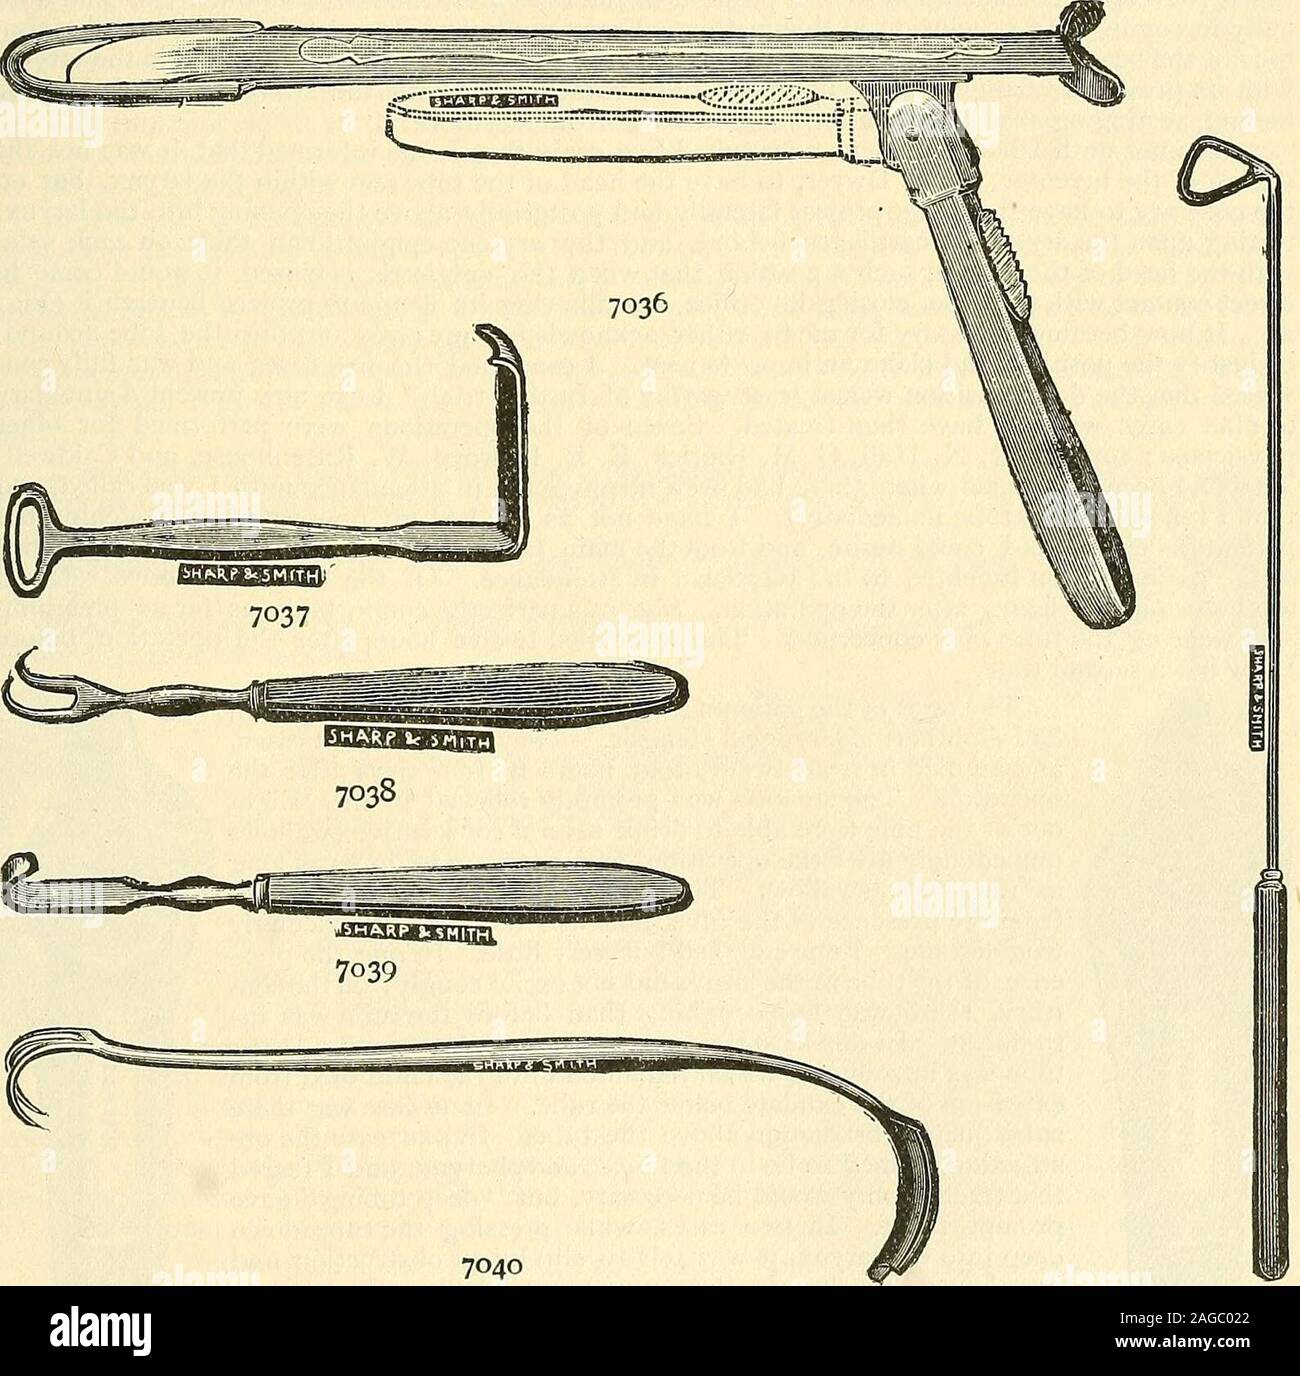 . Catalogue of Sharp & Smith : importers, manufacturers, wholesale and retail dealers in surgical instruments, deformity apparatus, artificial limbs, artificial eyes, elastic stockings, trusses, crutches, supporters, galvanic and faradic batteries, etc., surgeons' appliances of every description. See pages 447 to 523 for other Mouth and Throat Instruments, SHARP & SMITH, CHICAGO. 909 MISCELLANEOUS INSTRUMENTS—Mouth and Throat PIG. *703o Allinghams Mouth Gag (Annandales) $ 5 *703i Henrotins 2 *7o32 Faengers 4 *7o33 Dr. F. C. Hotz Curved Tonsil Forceps 3 *7034 Worrells Head Band Metal Spring to Stock Photo